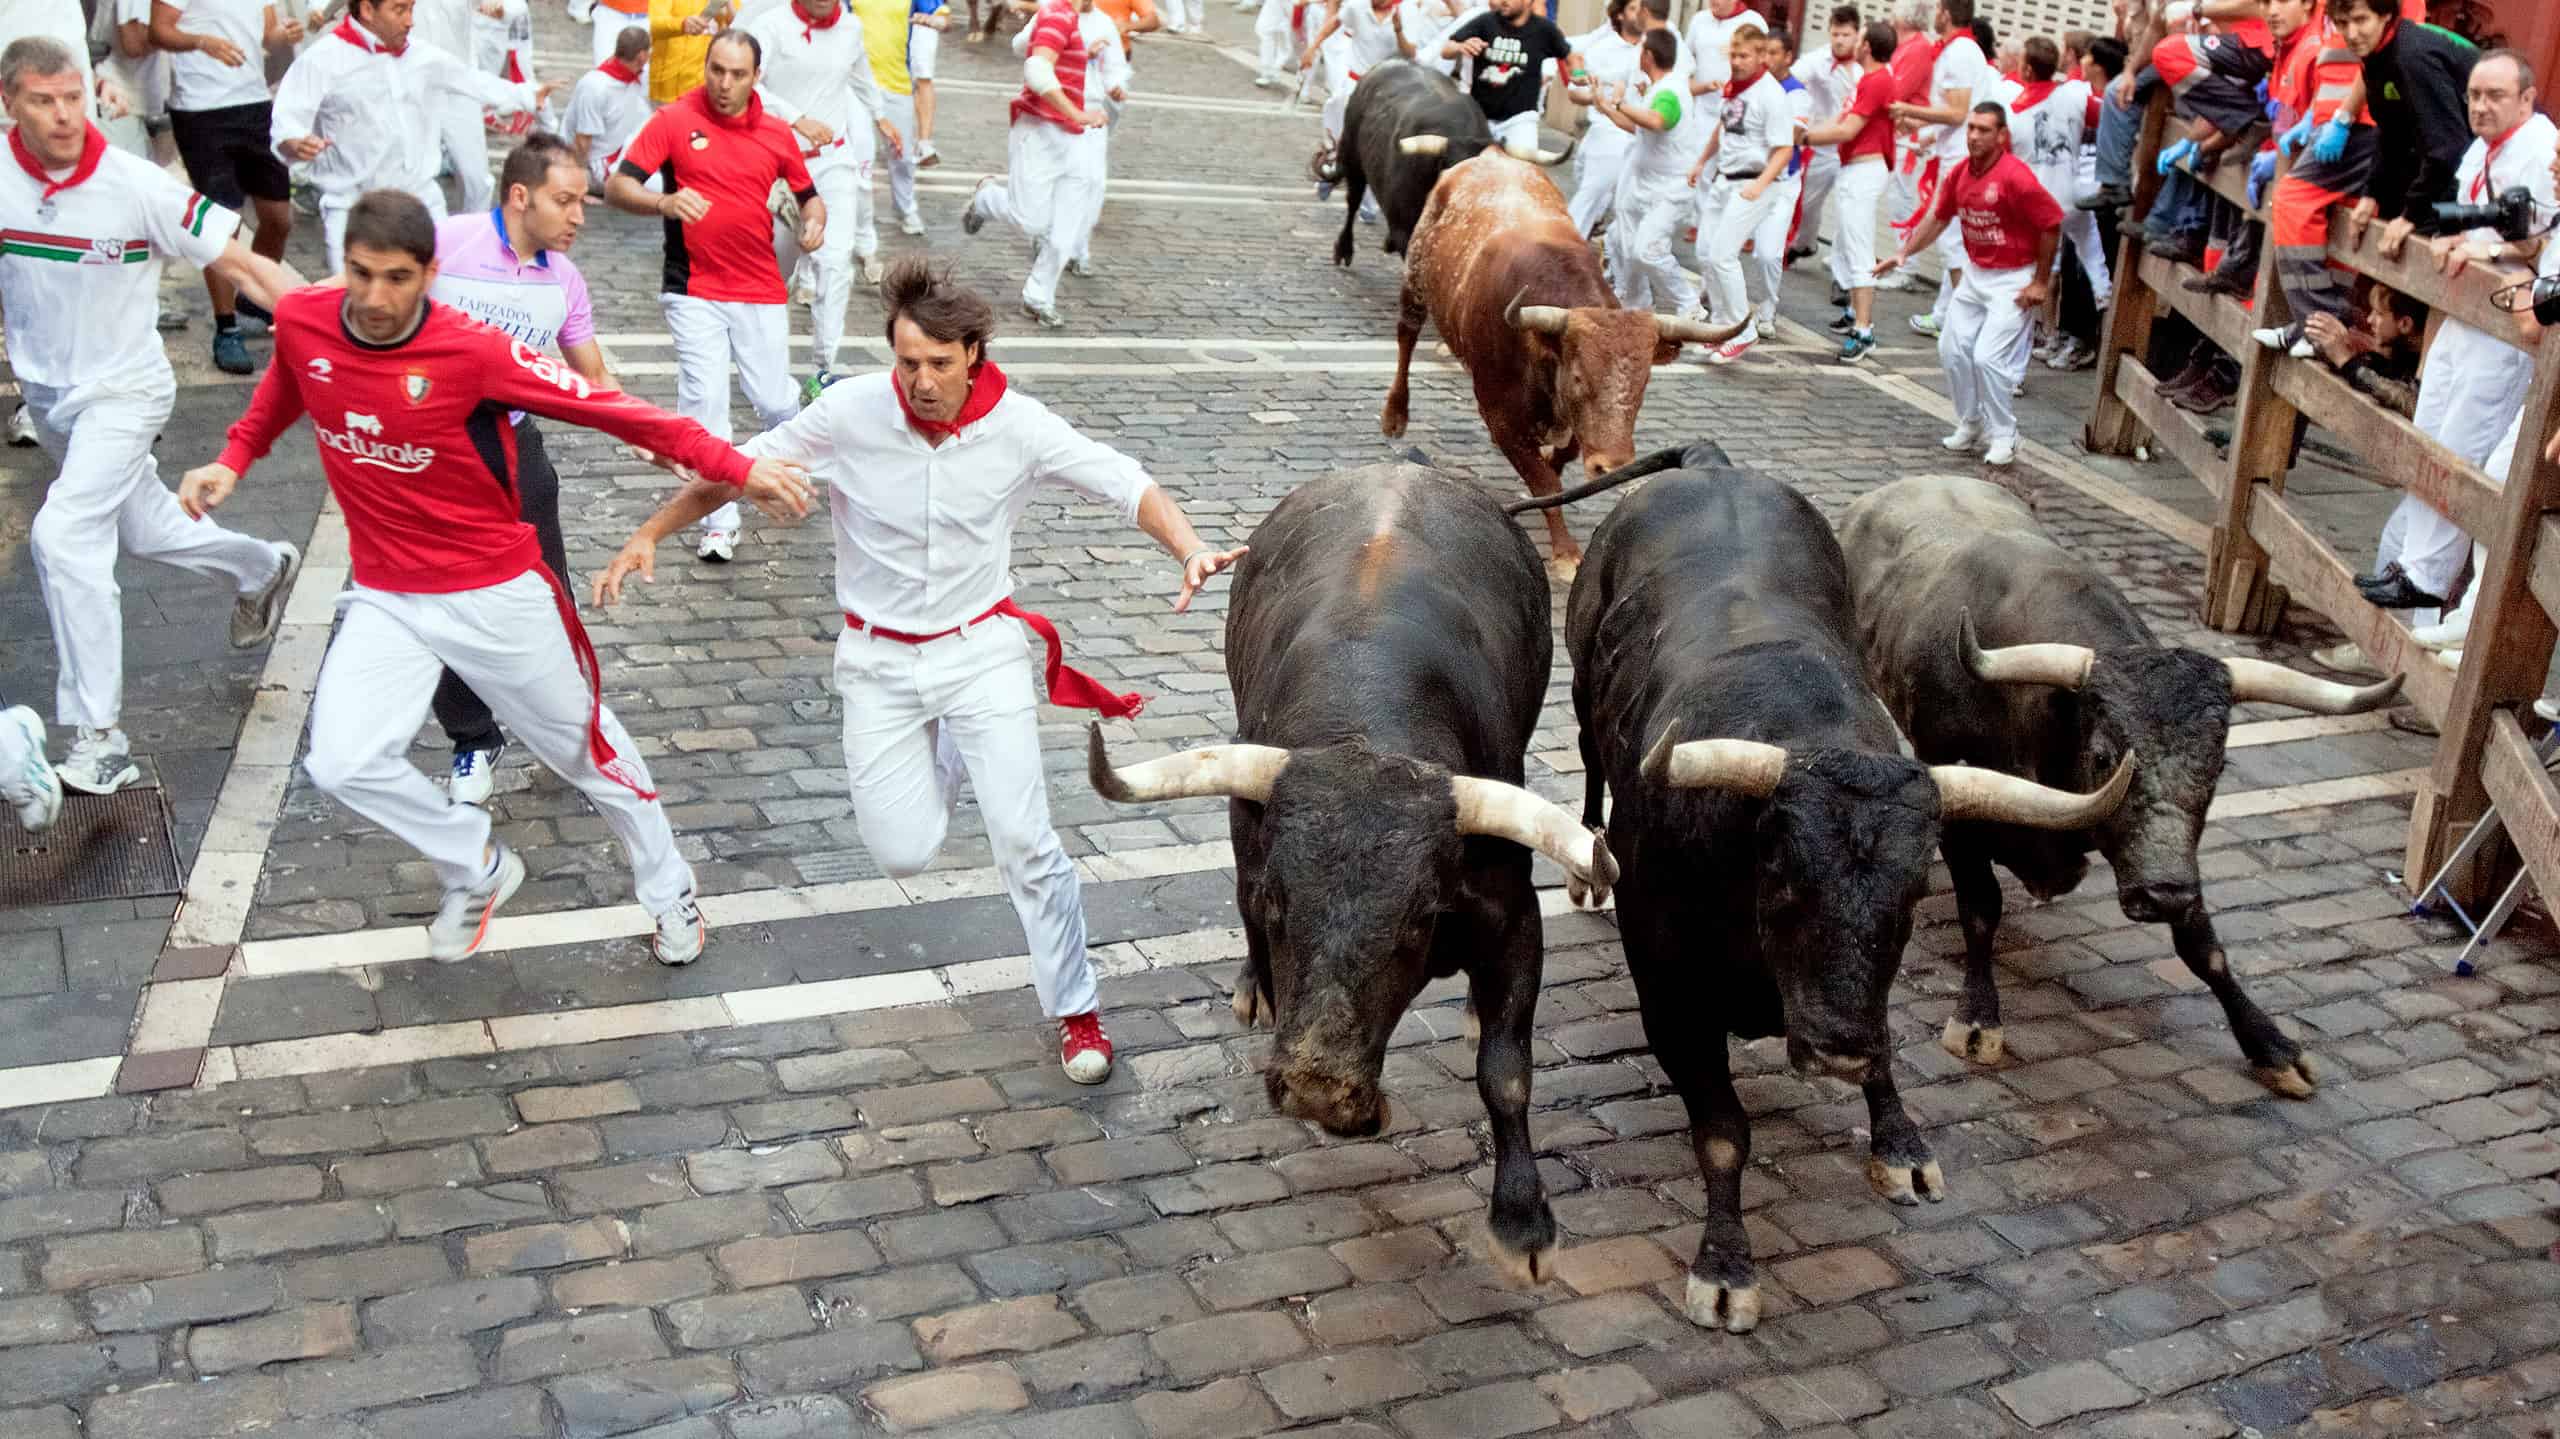 Spain's Famous 'Running of the Bulls' Starts This Week Just How